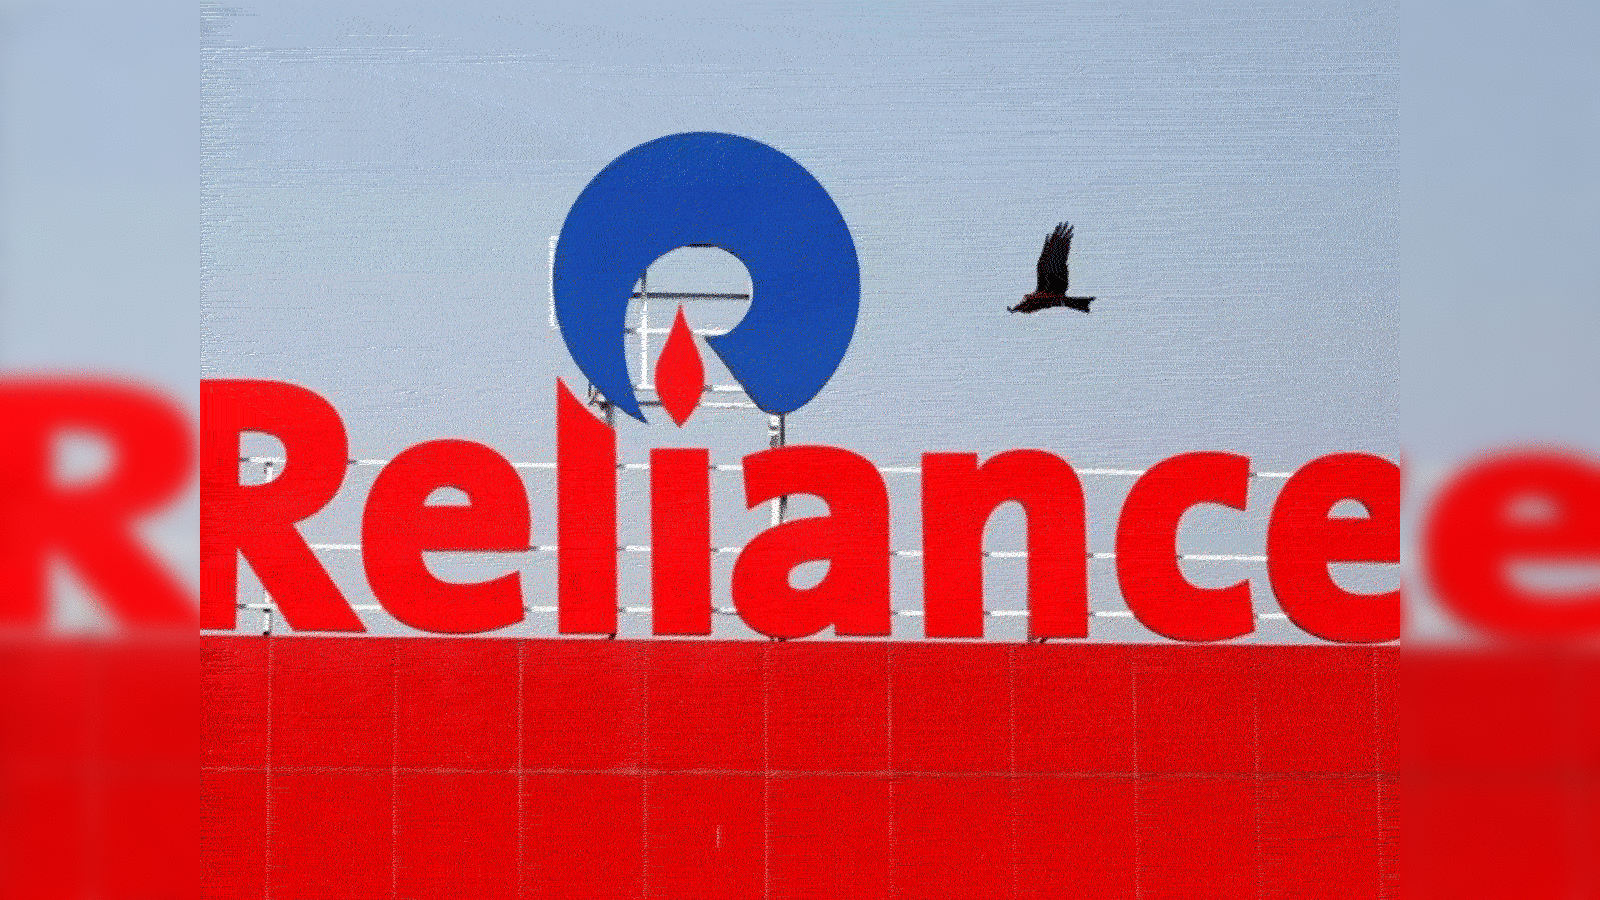 ril share price: Reliance shares rally but TV18, Network18 fall 5% as  investors react to Ambani-Disney deal - The Economic Times